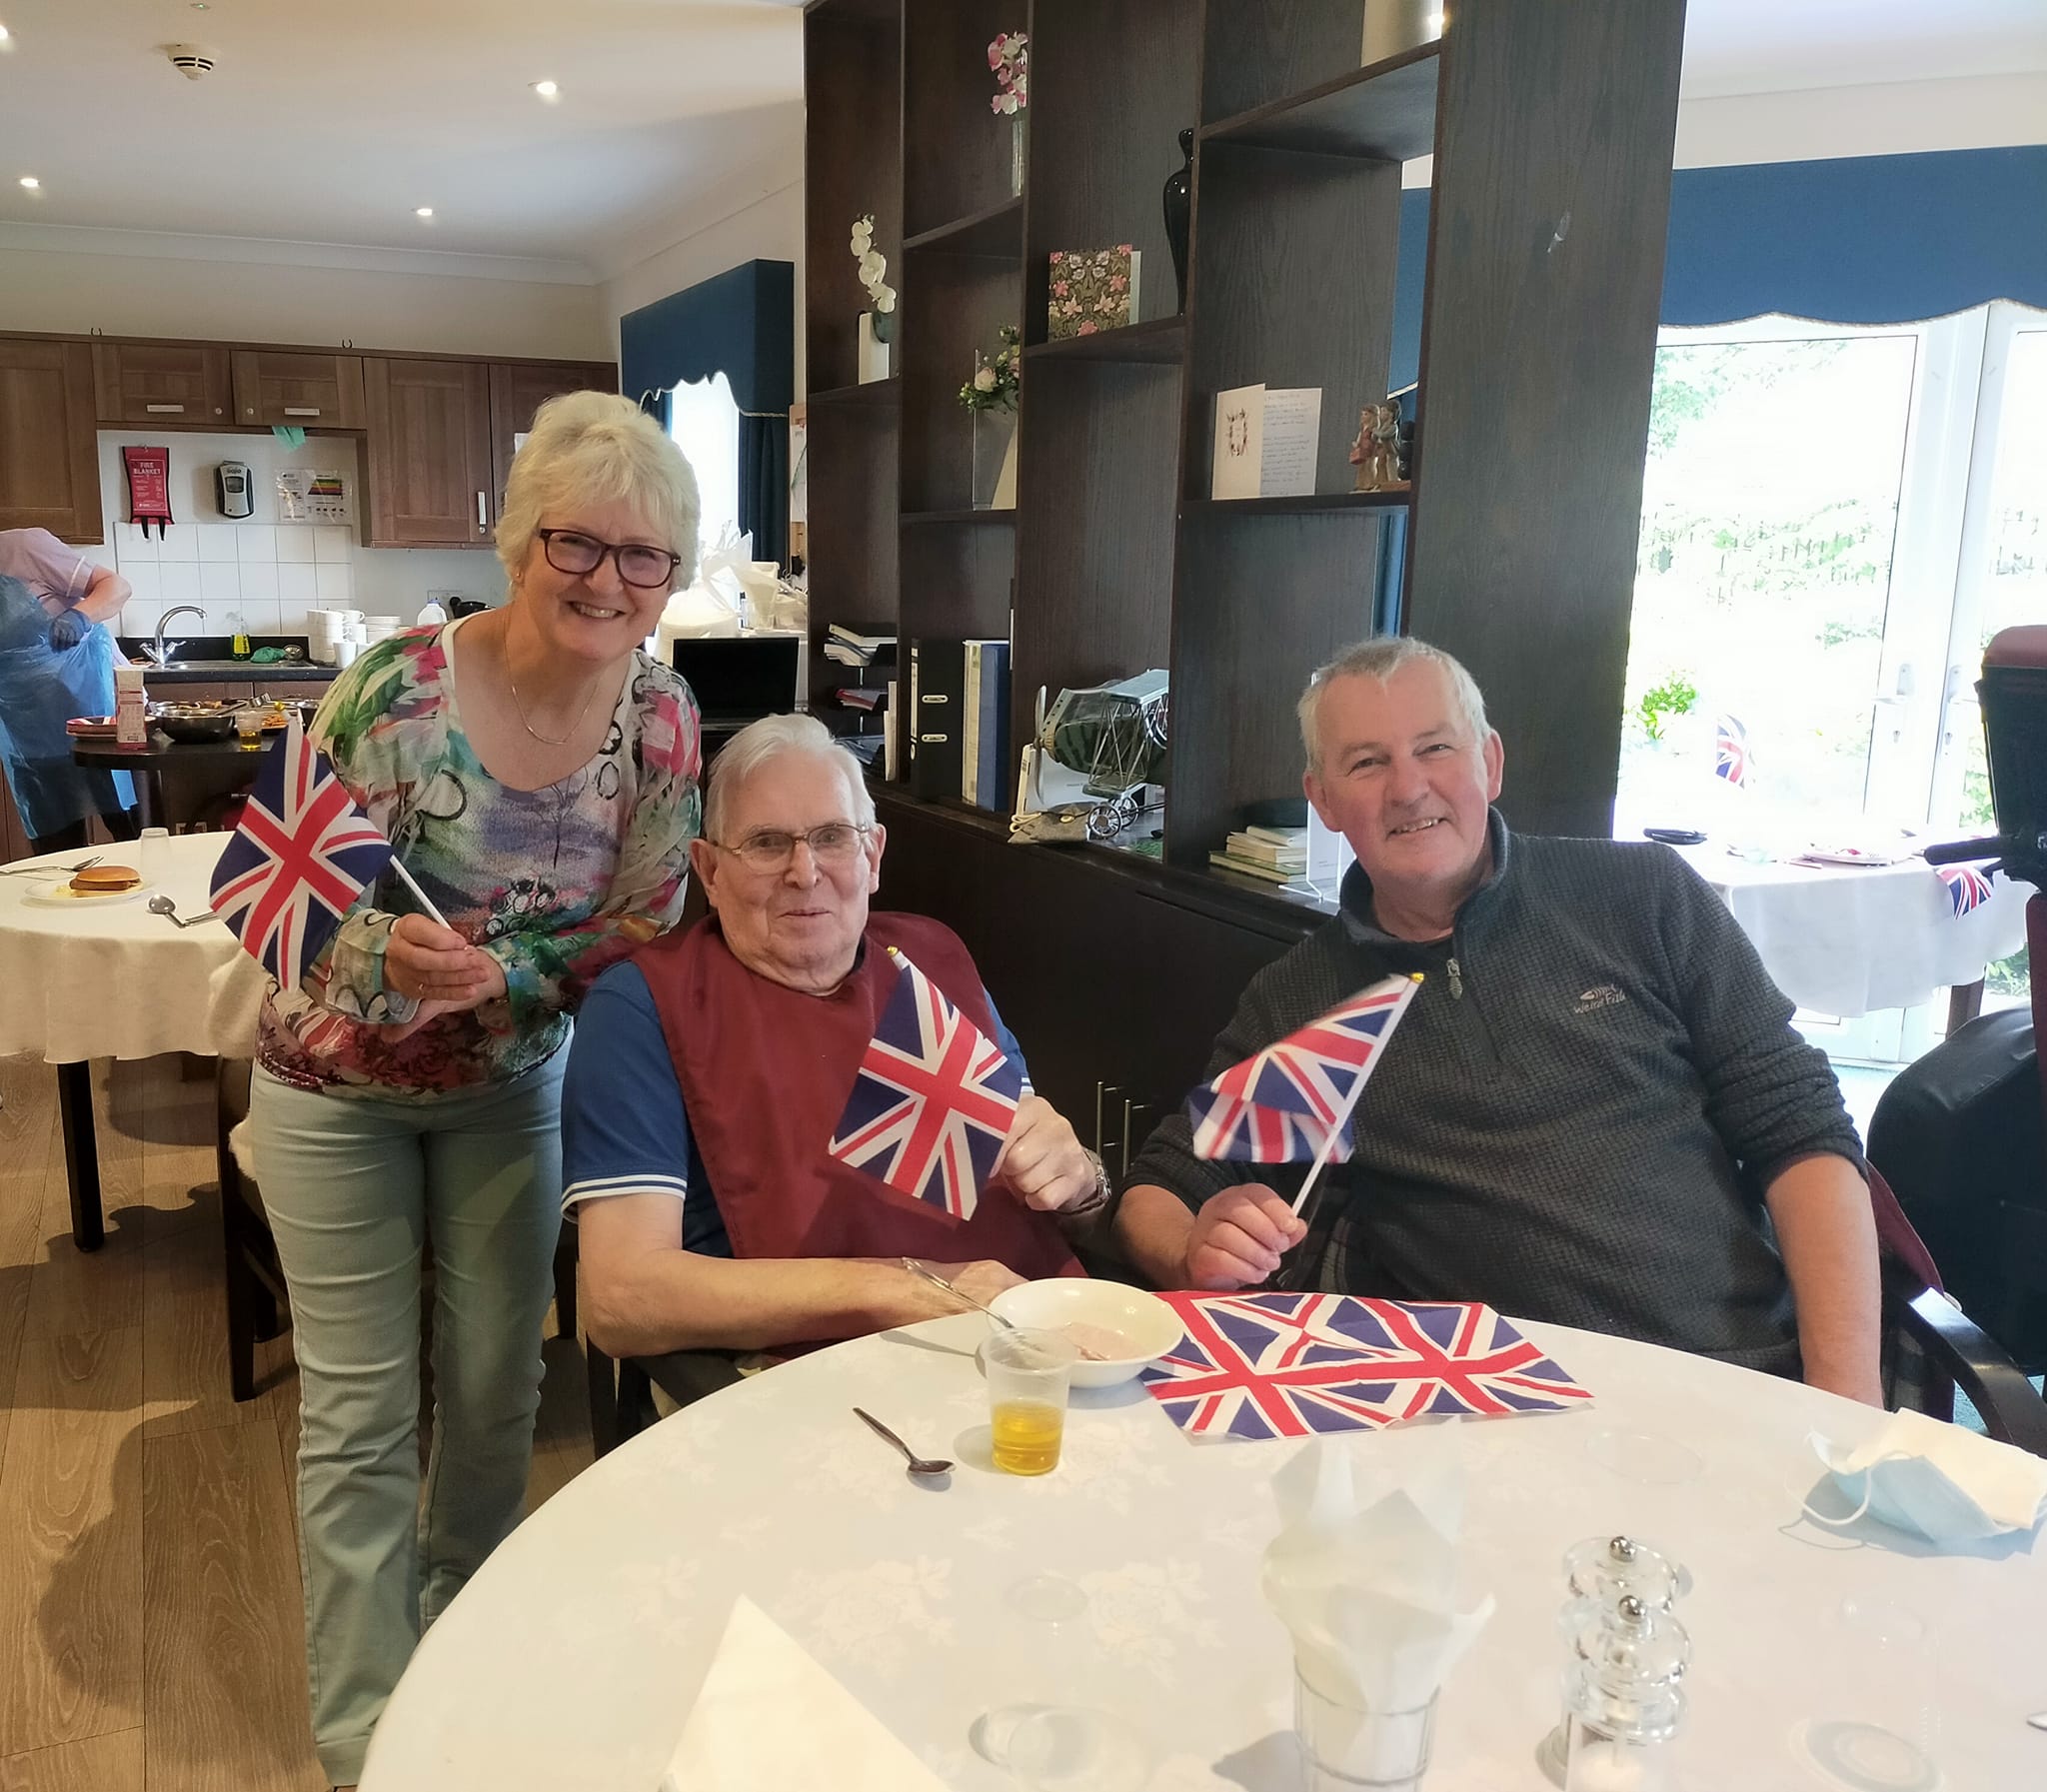 A resident and his loved ones waving the Union Jack flag.